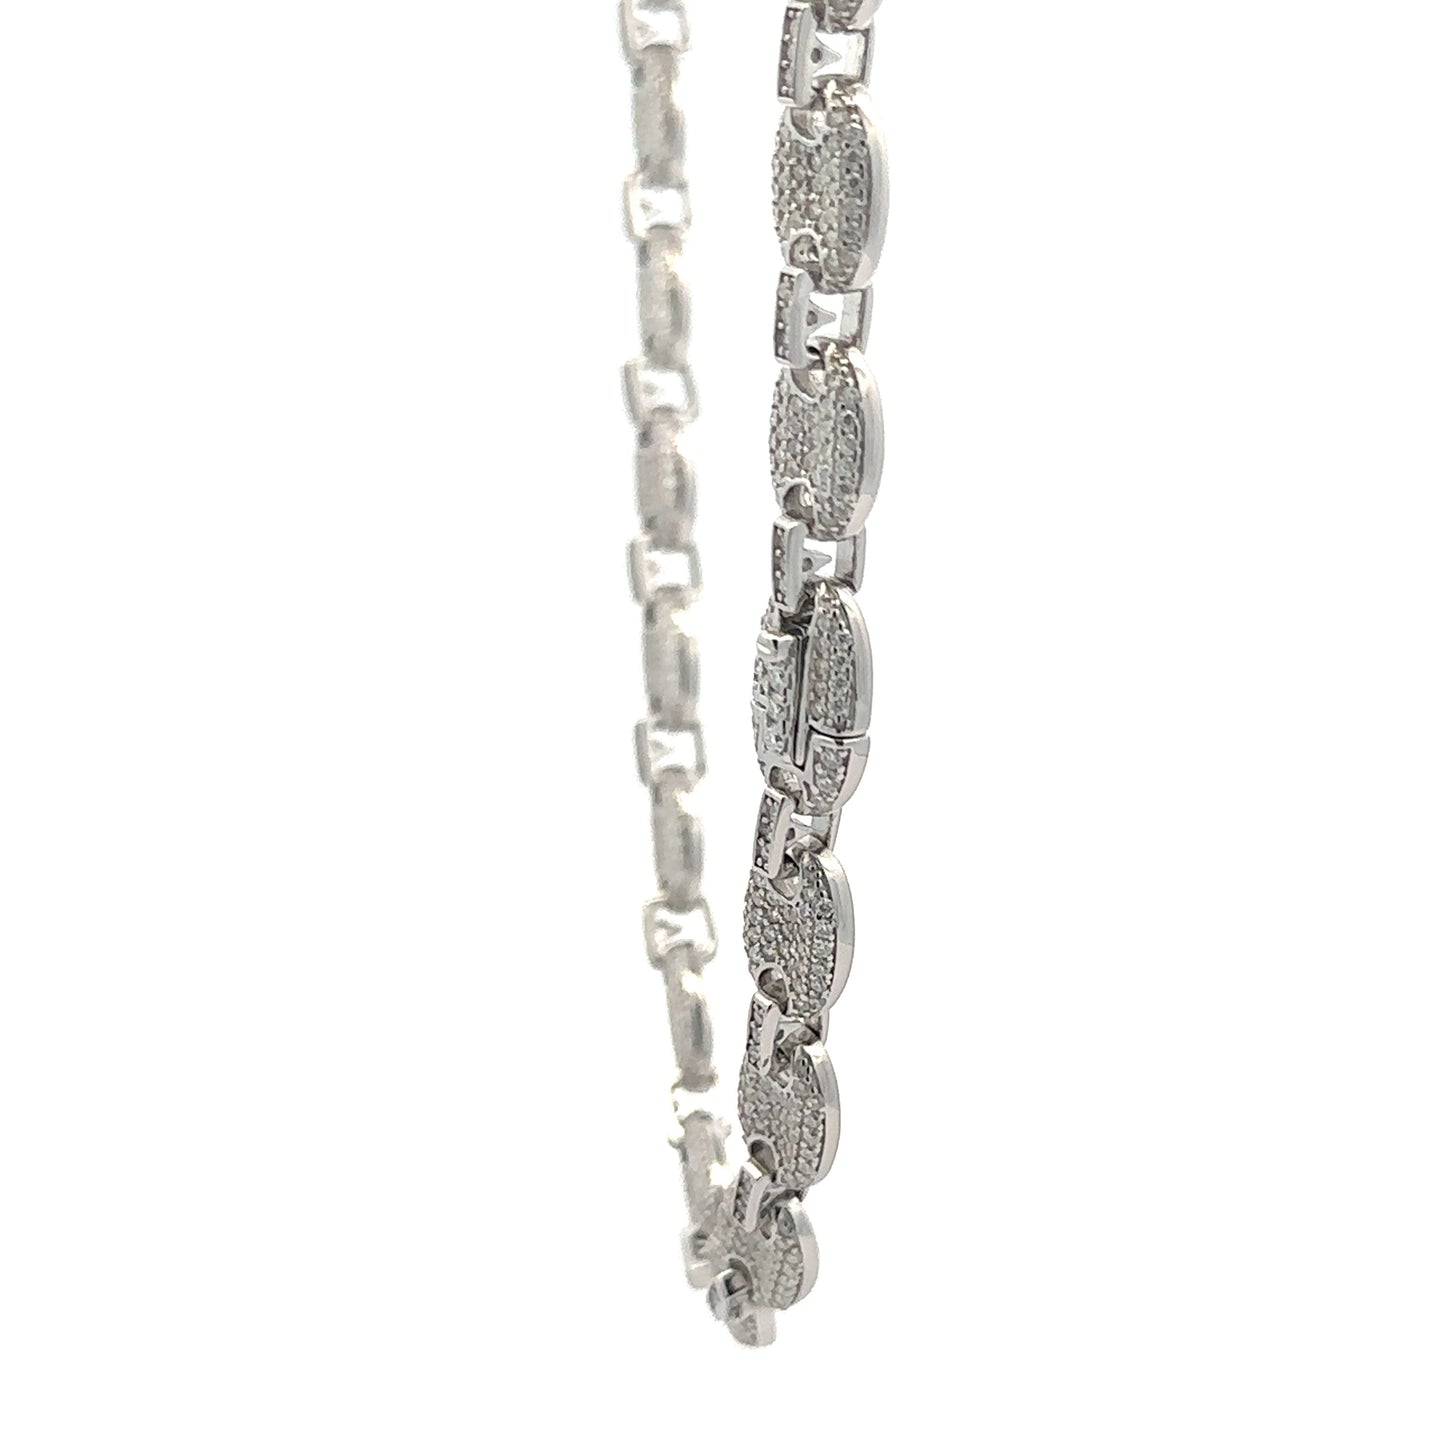 ORACULAR 4.63 CTW RHODIUM MOISSANITE ICED OUT CHAIN  |  996491